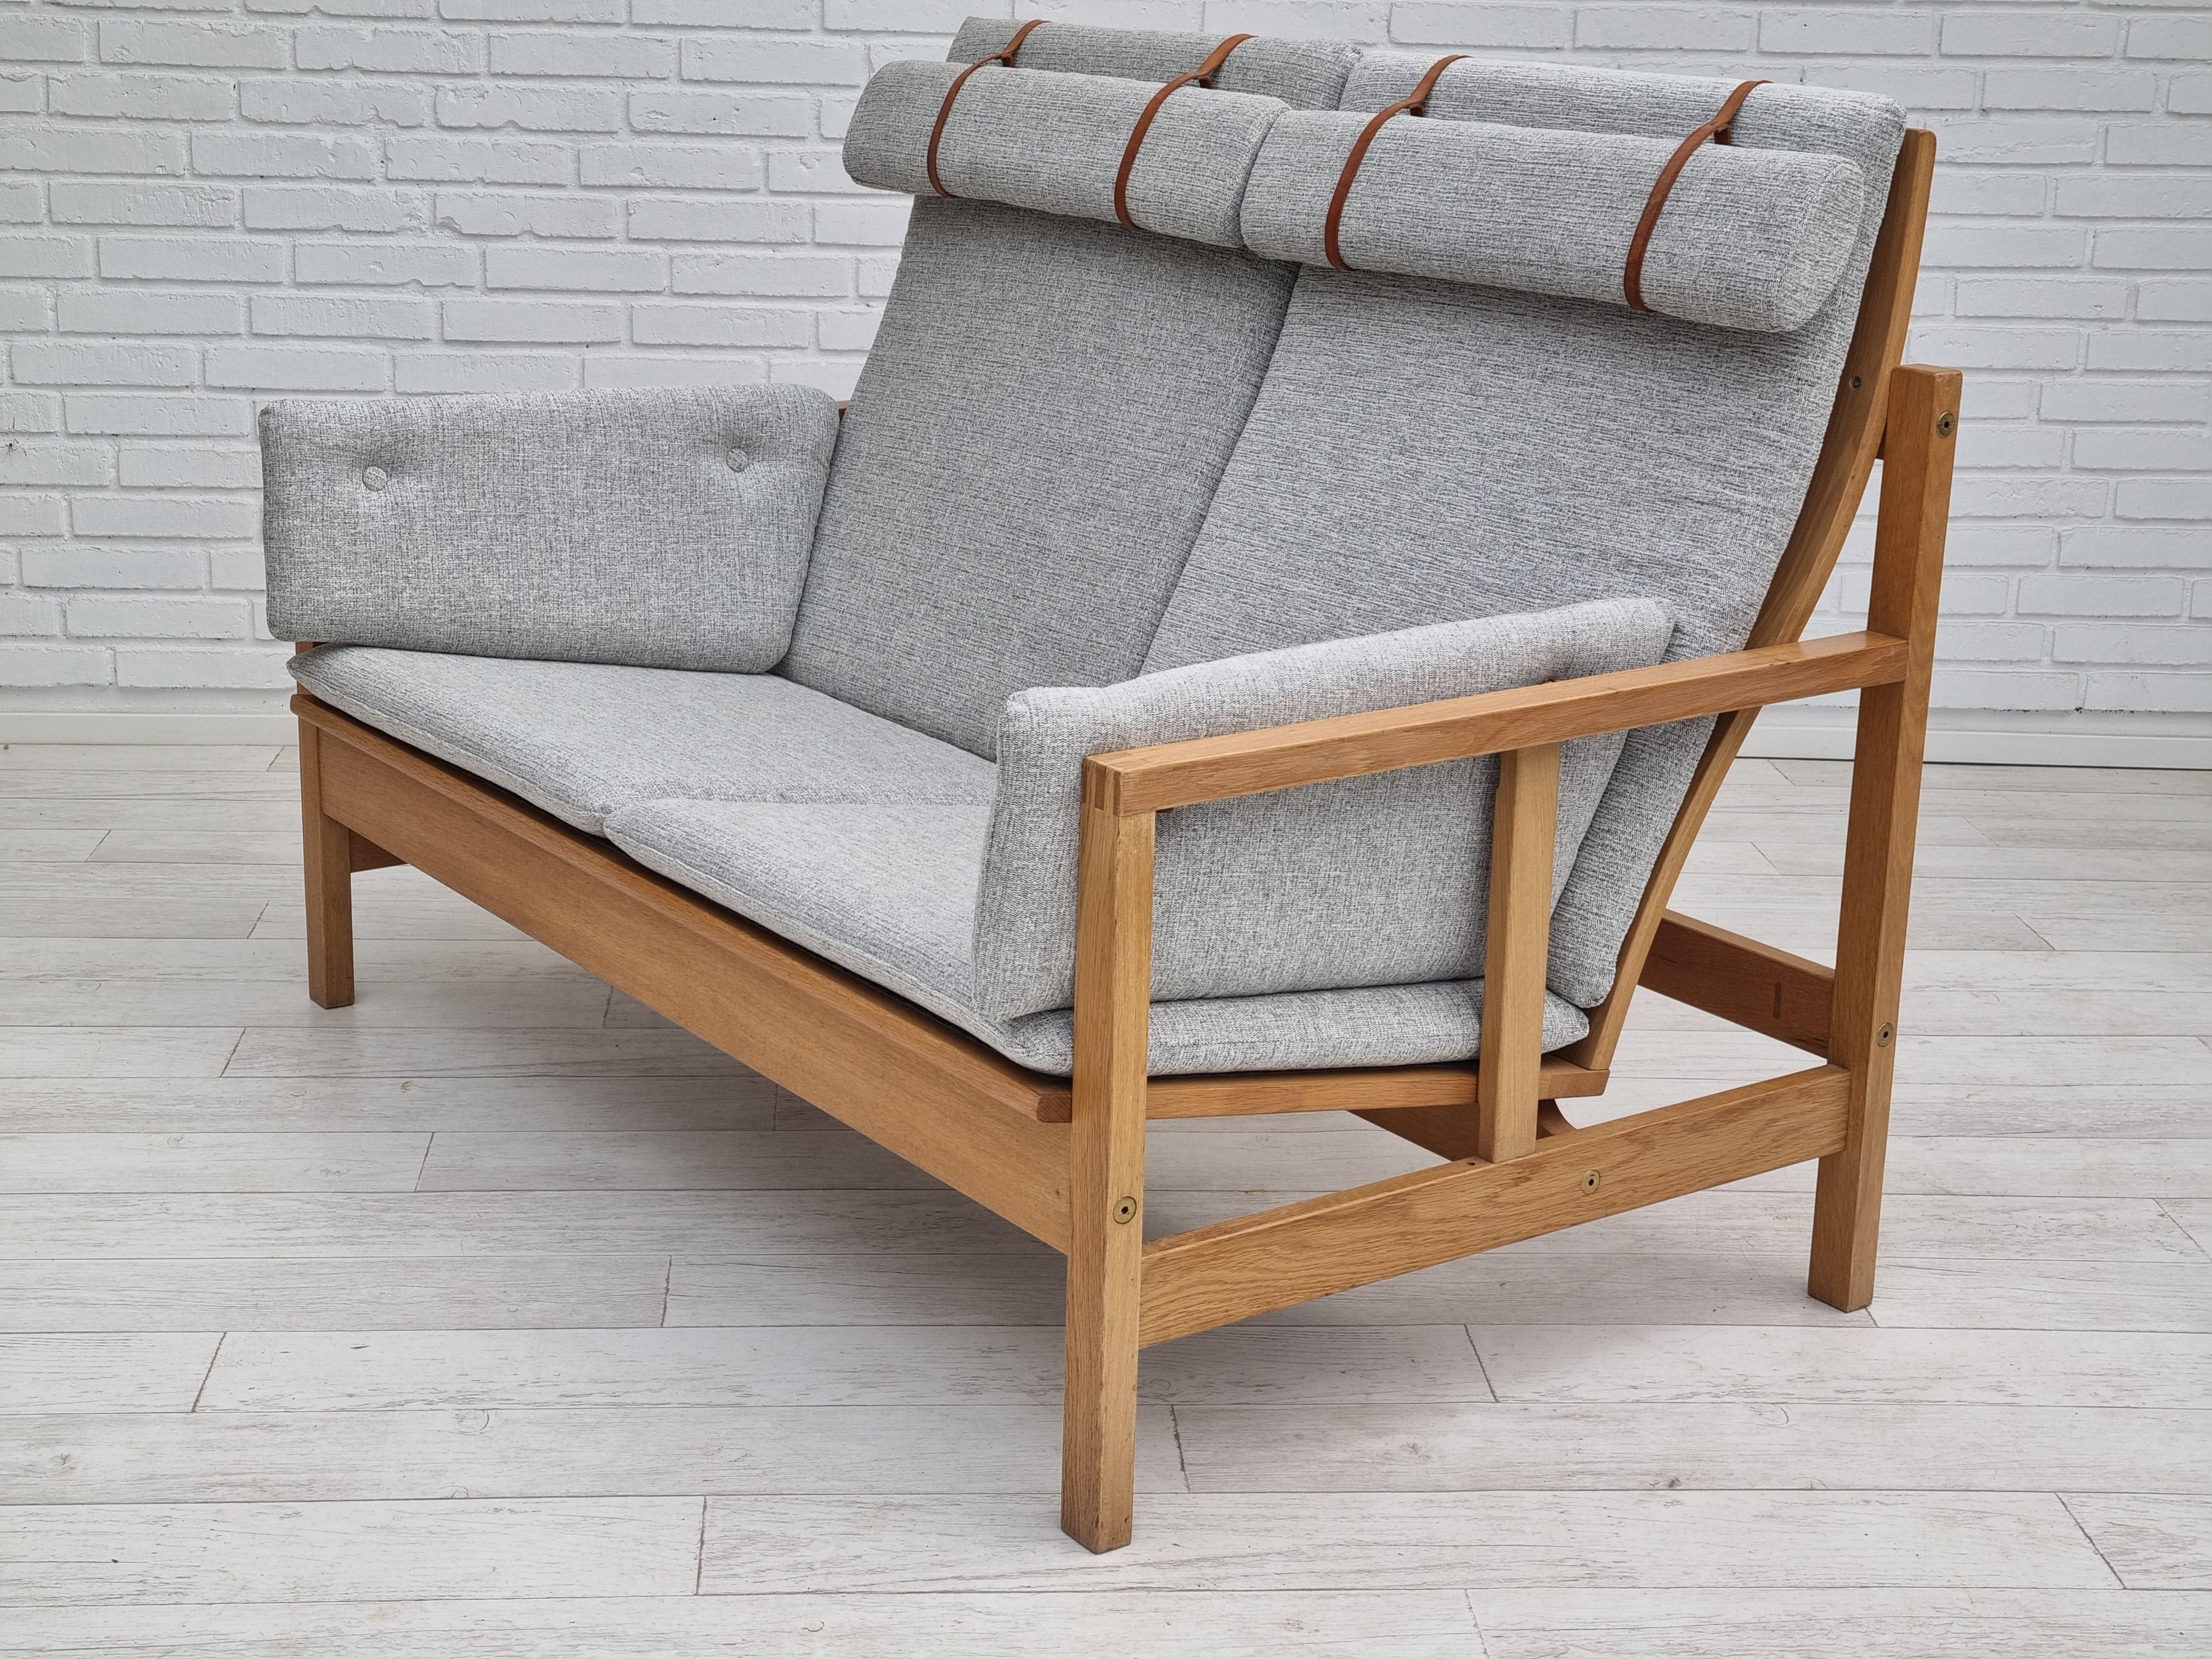 70s, Danish design by Børge Mogensen, 2 seater sofa, model 2252, oak wood In Excellent Condition In Tarm, 82